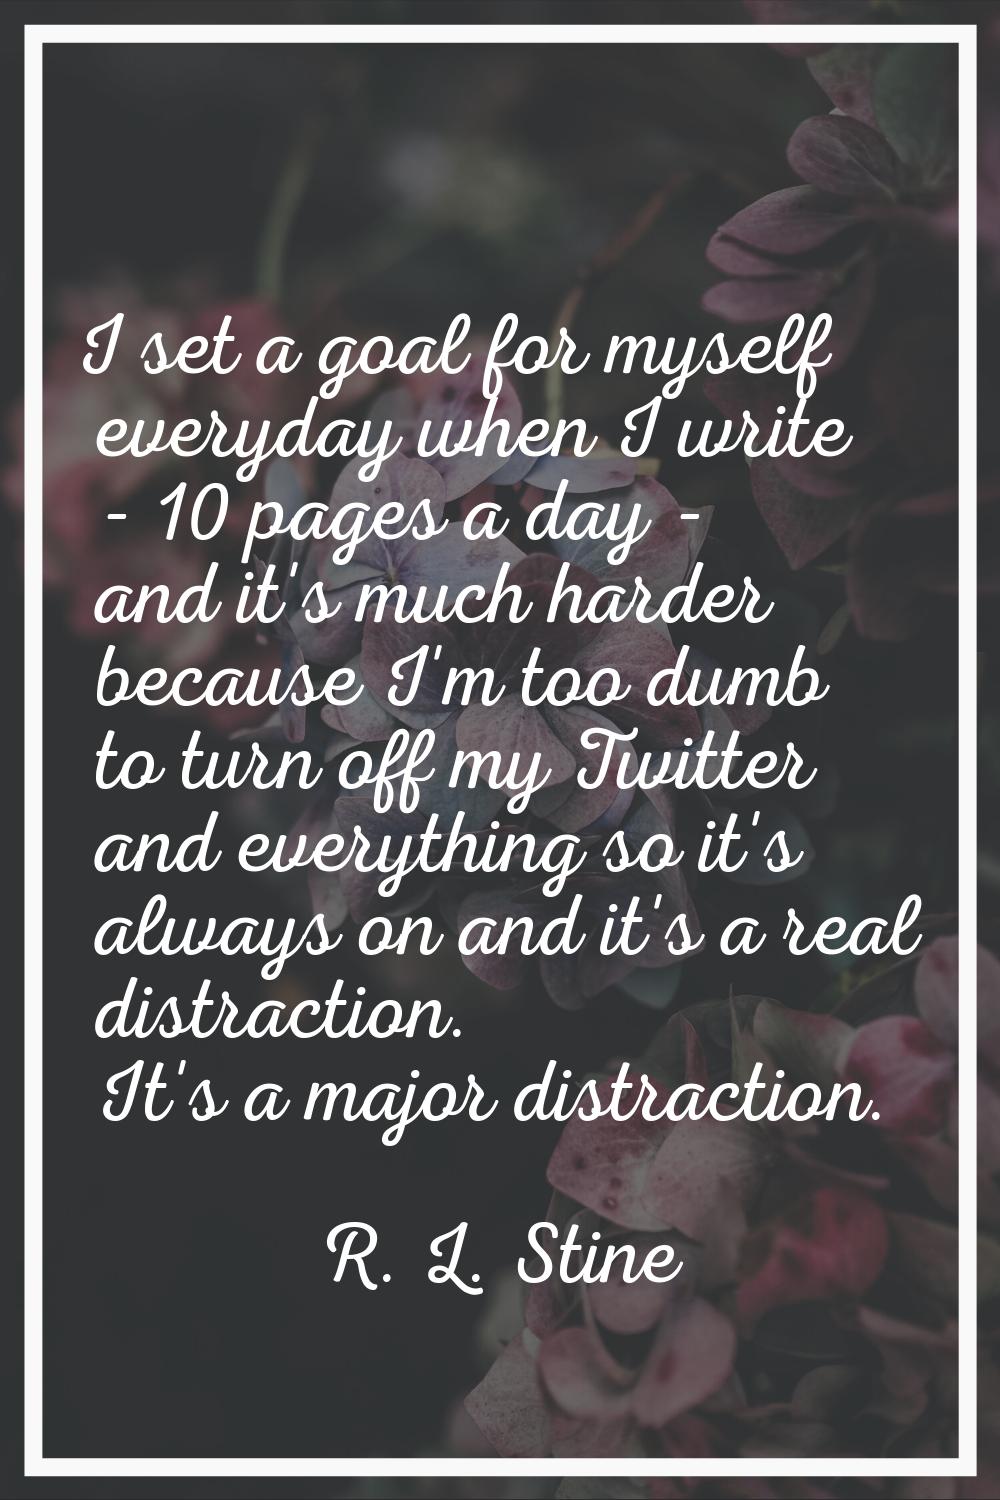 I set a goal for myself everyday when I write - 10 pages a day - and it's much harder because I'm t